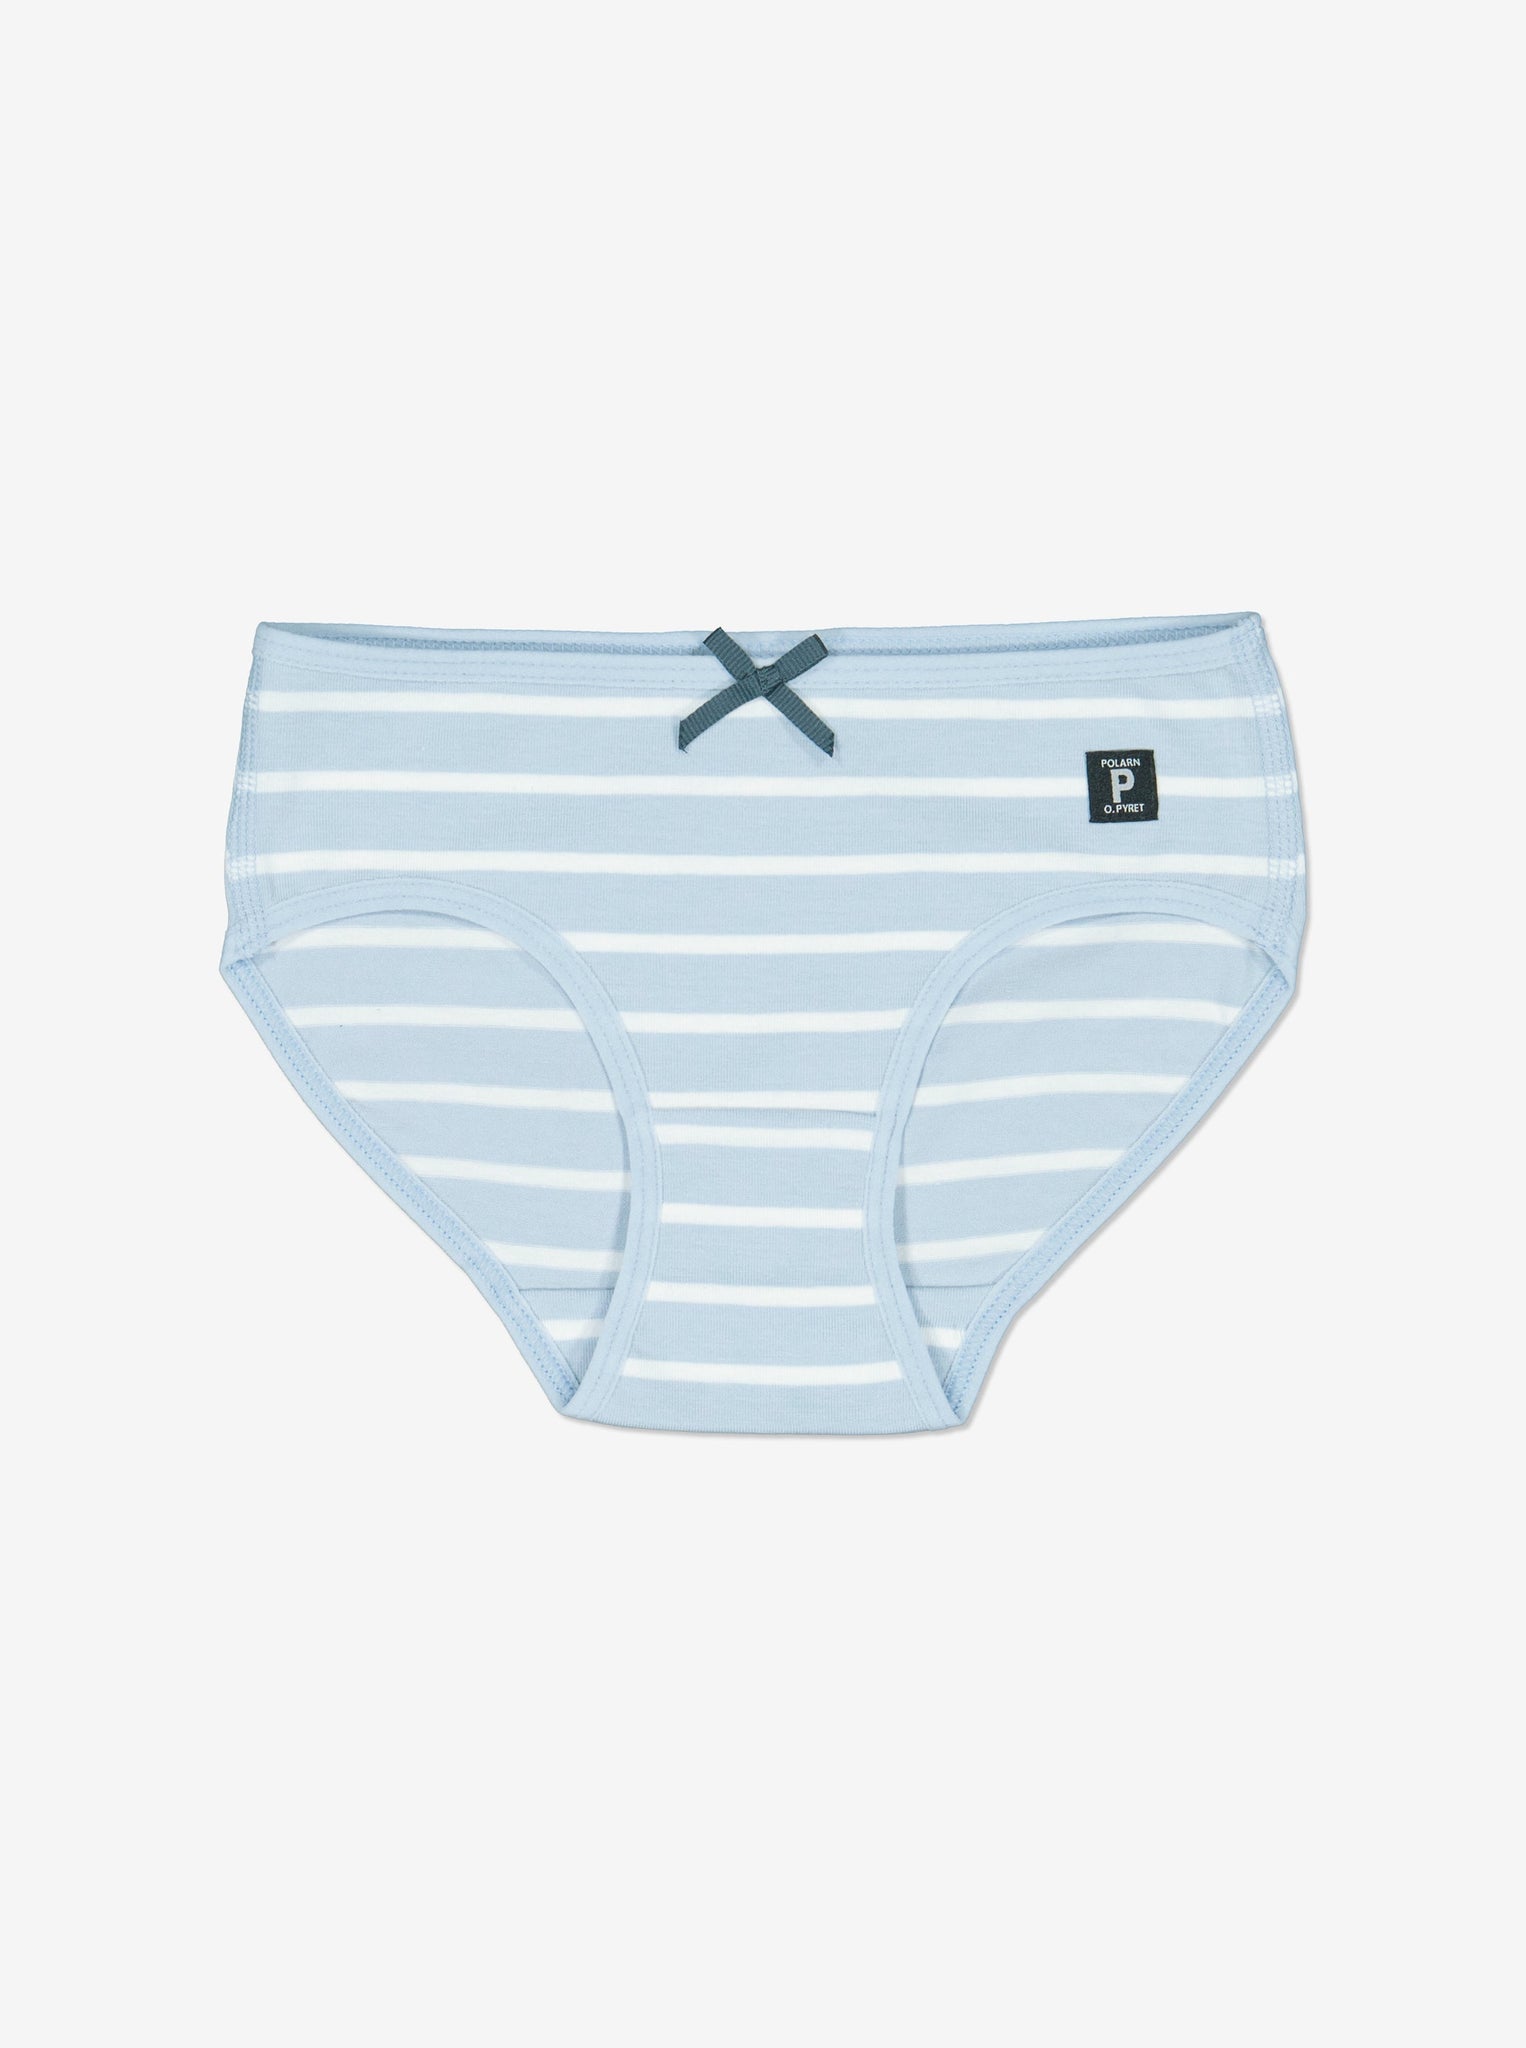 Organic Cotton Blue Girls Briefs from Polarn O. Pyret Kidswear. Made from ethically sourced materials.